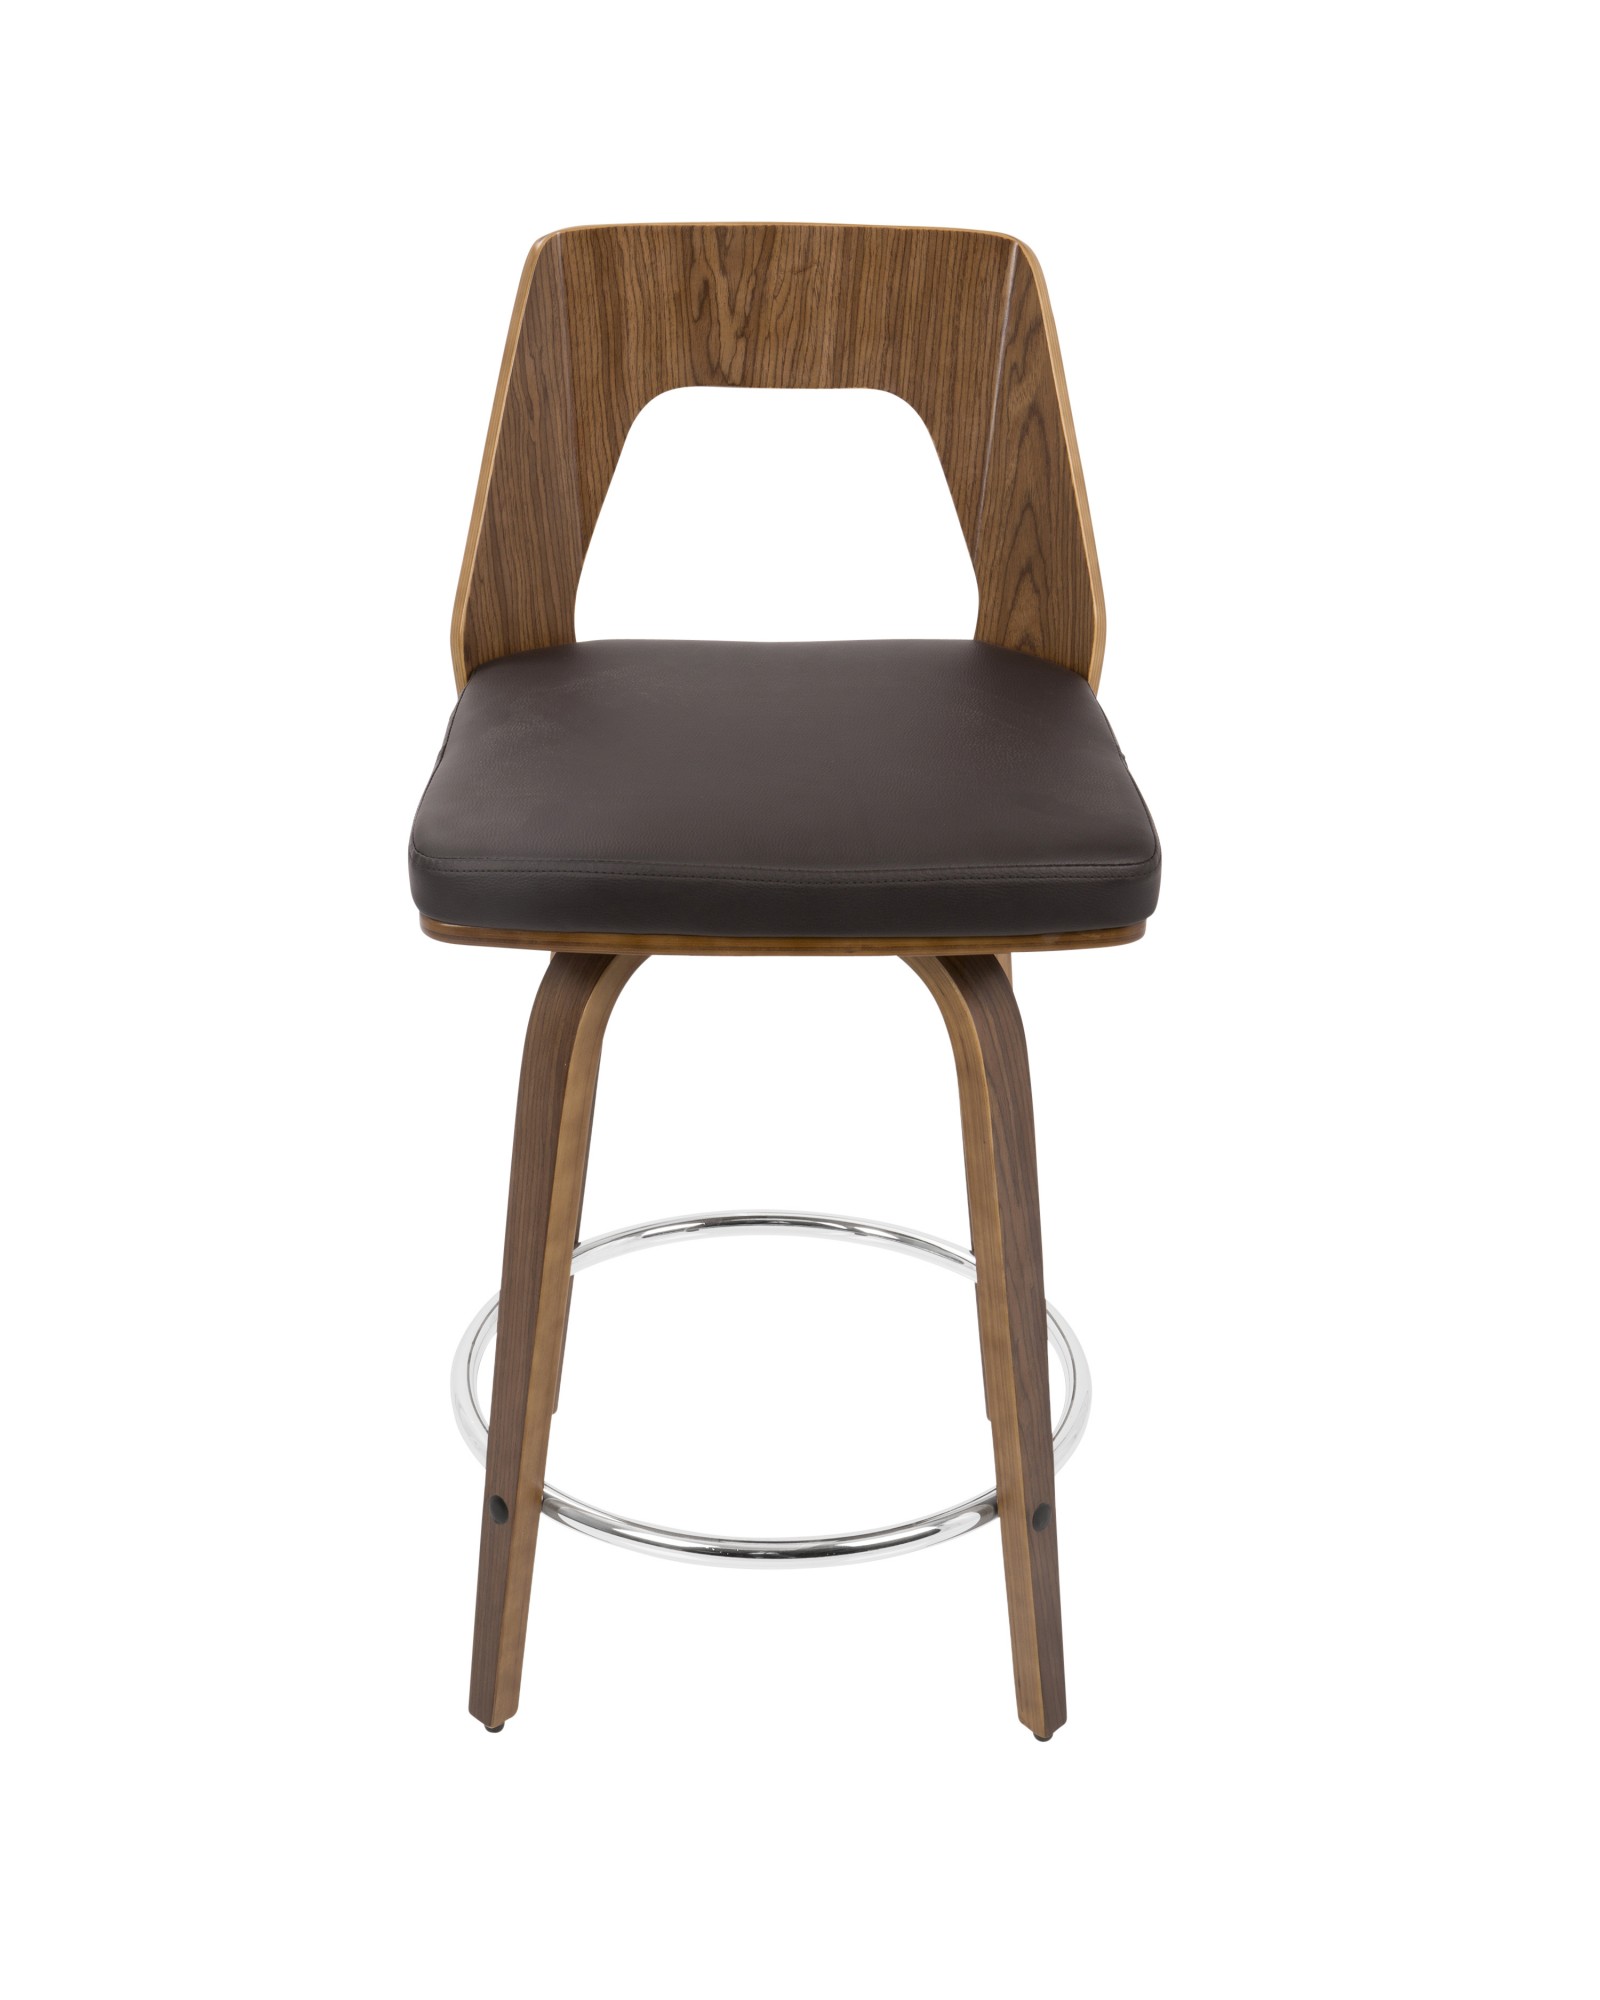 Trilogy Mid-Century Modern Counter Stool in Walnut and Brown Faux Leather